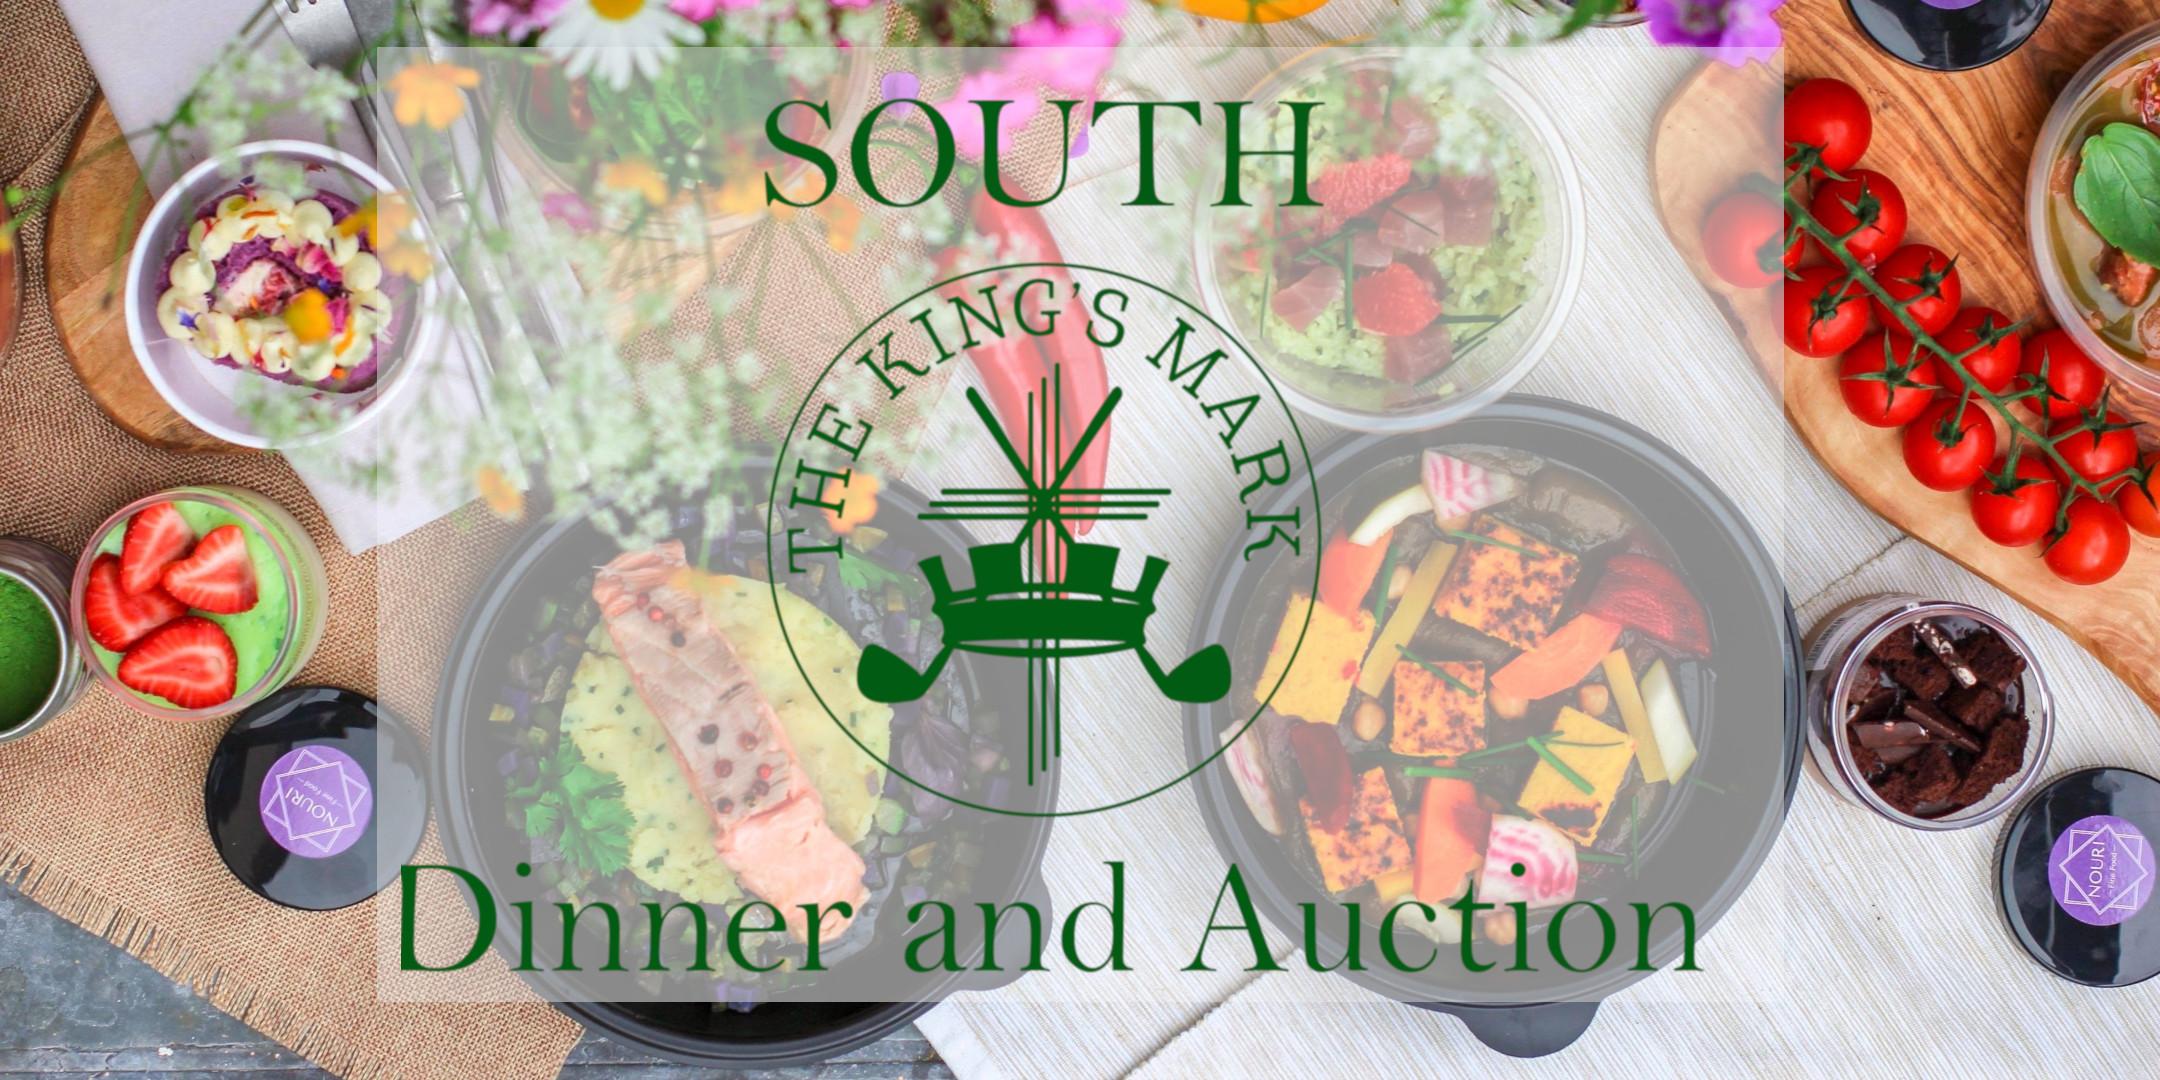 King's Mark Golf Title Dinner and Auction for the South